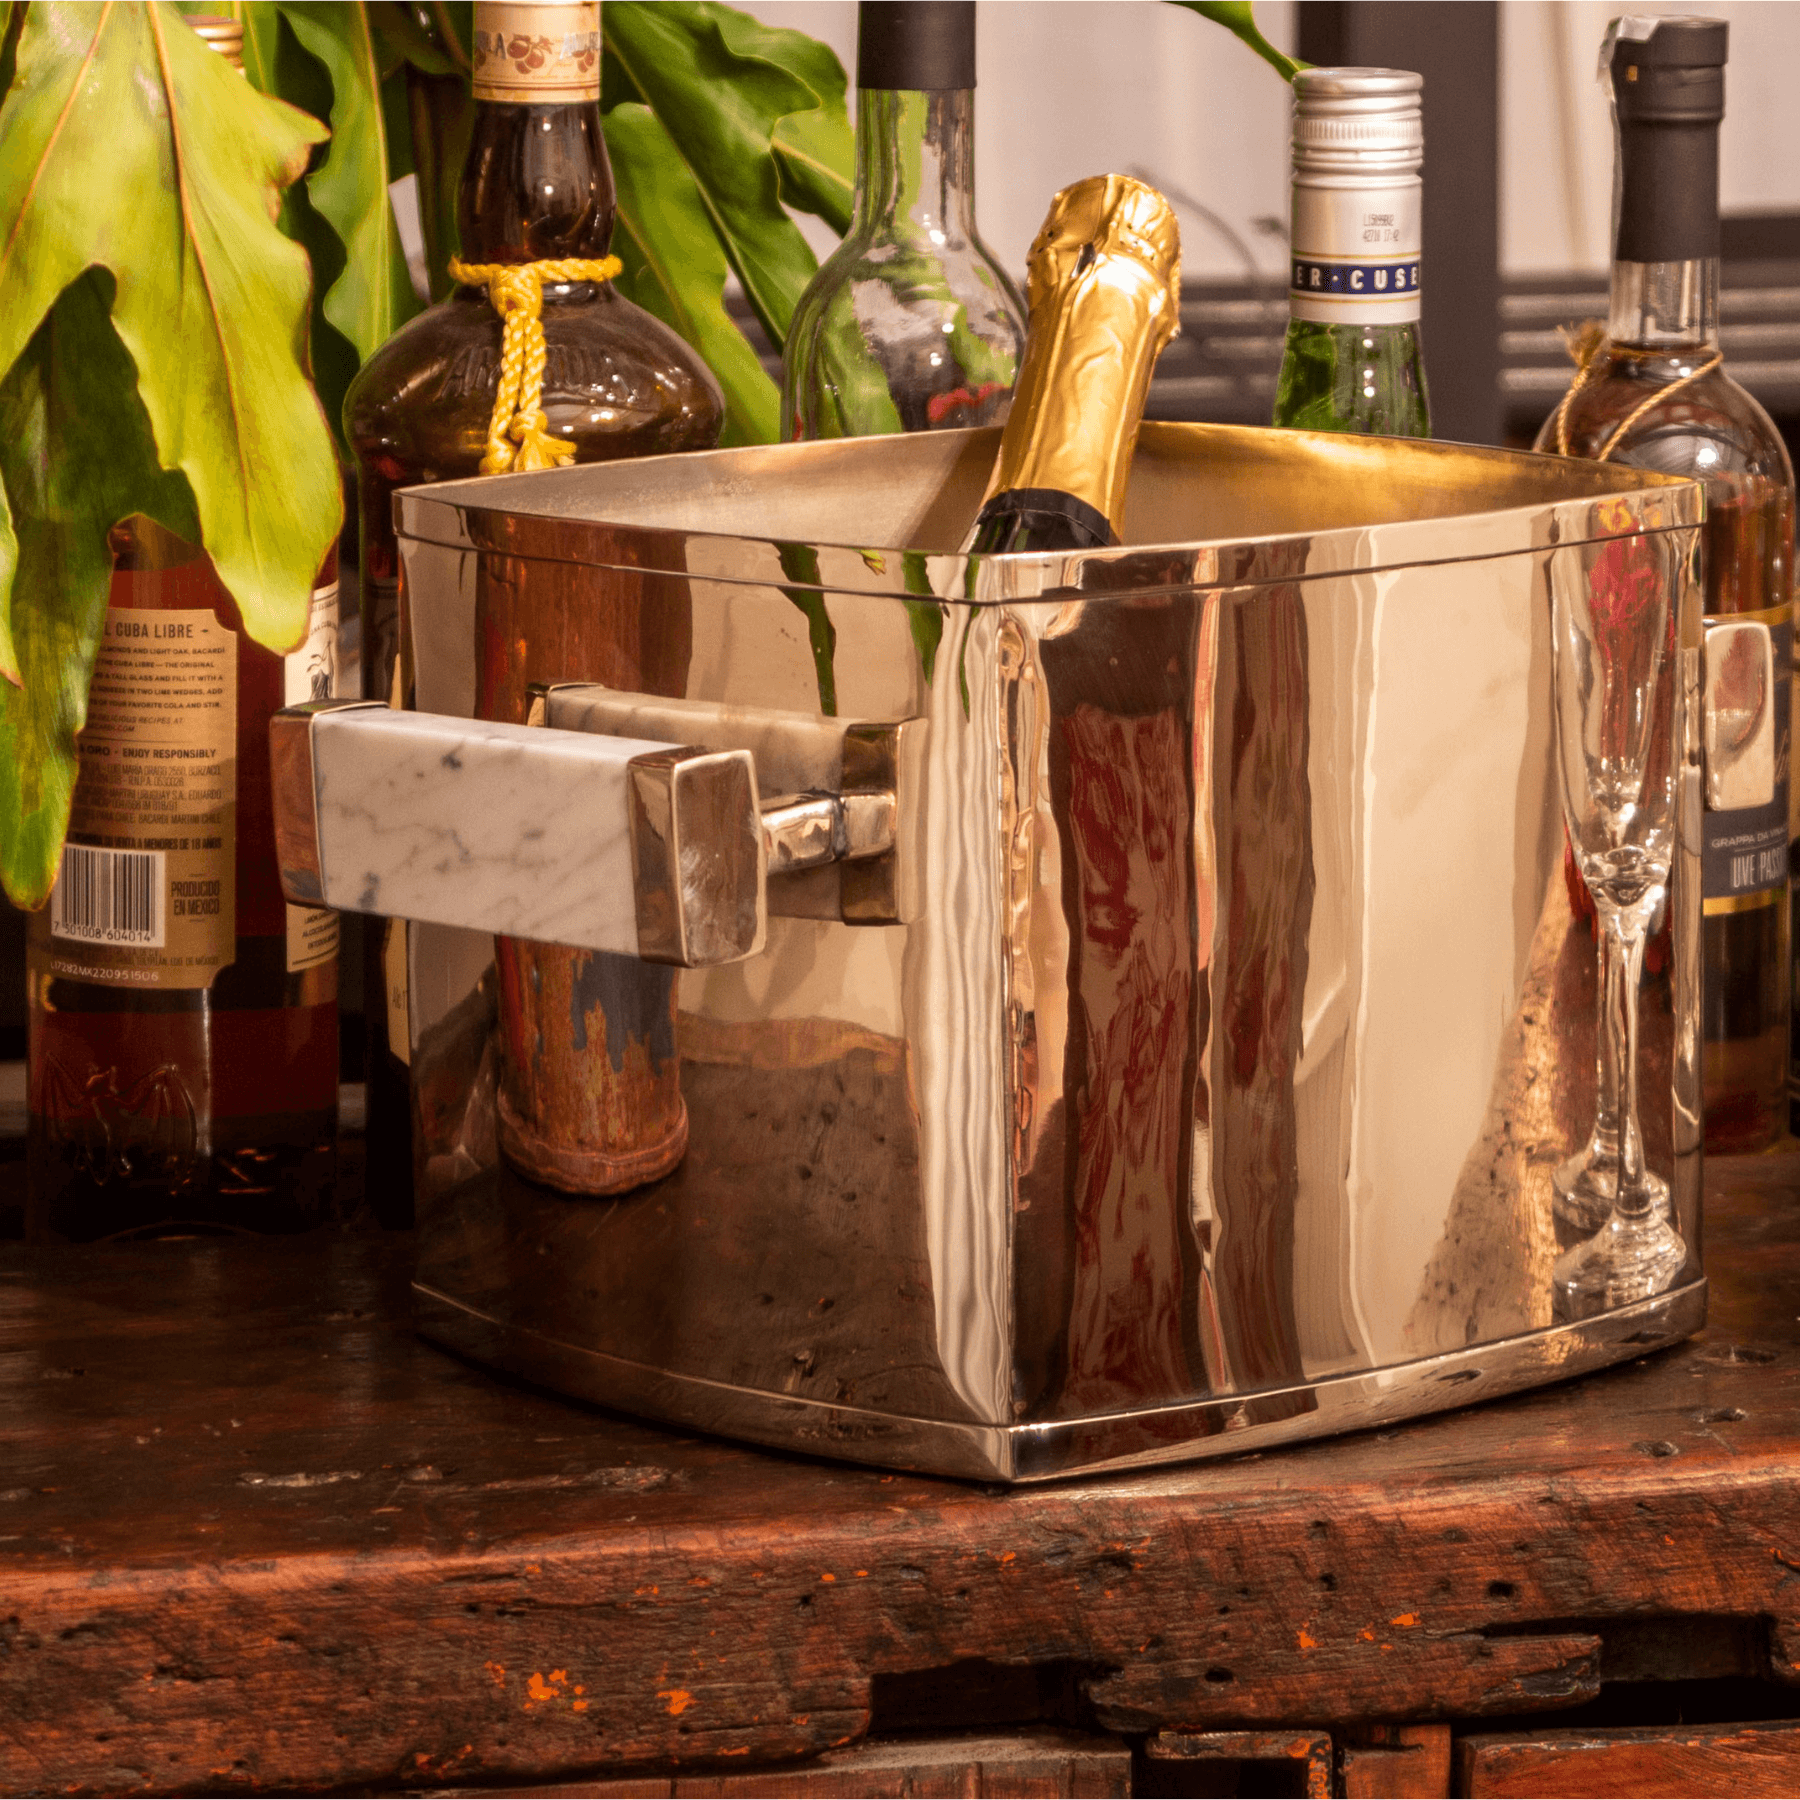 Gaucholife Home Champagne Cooler